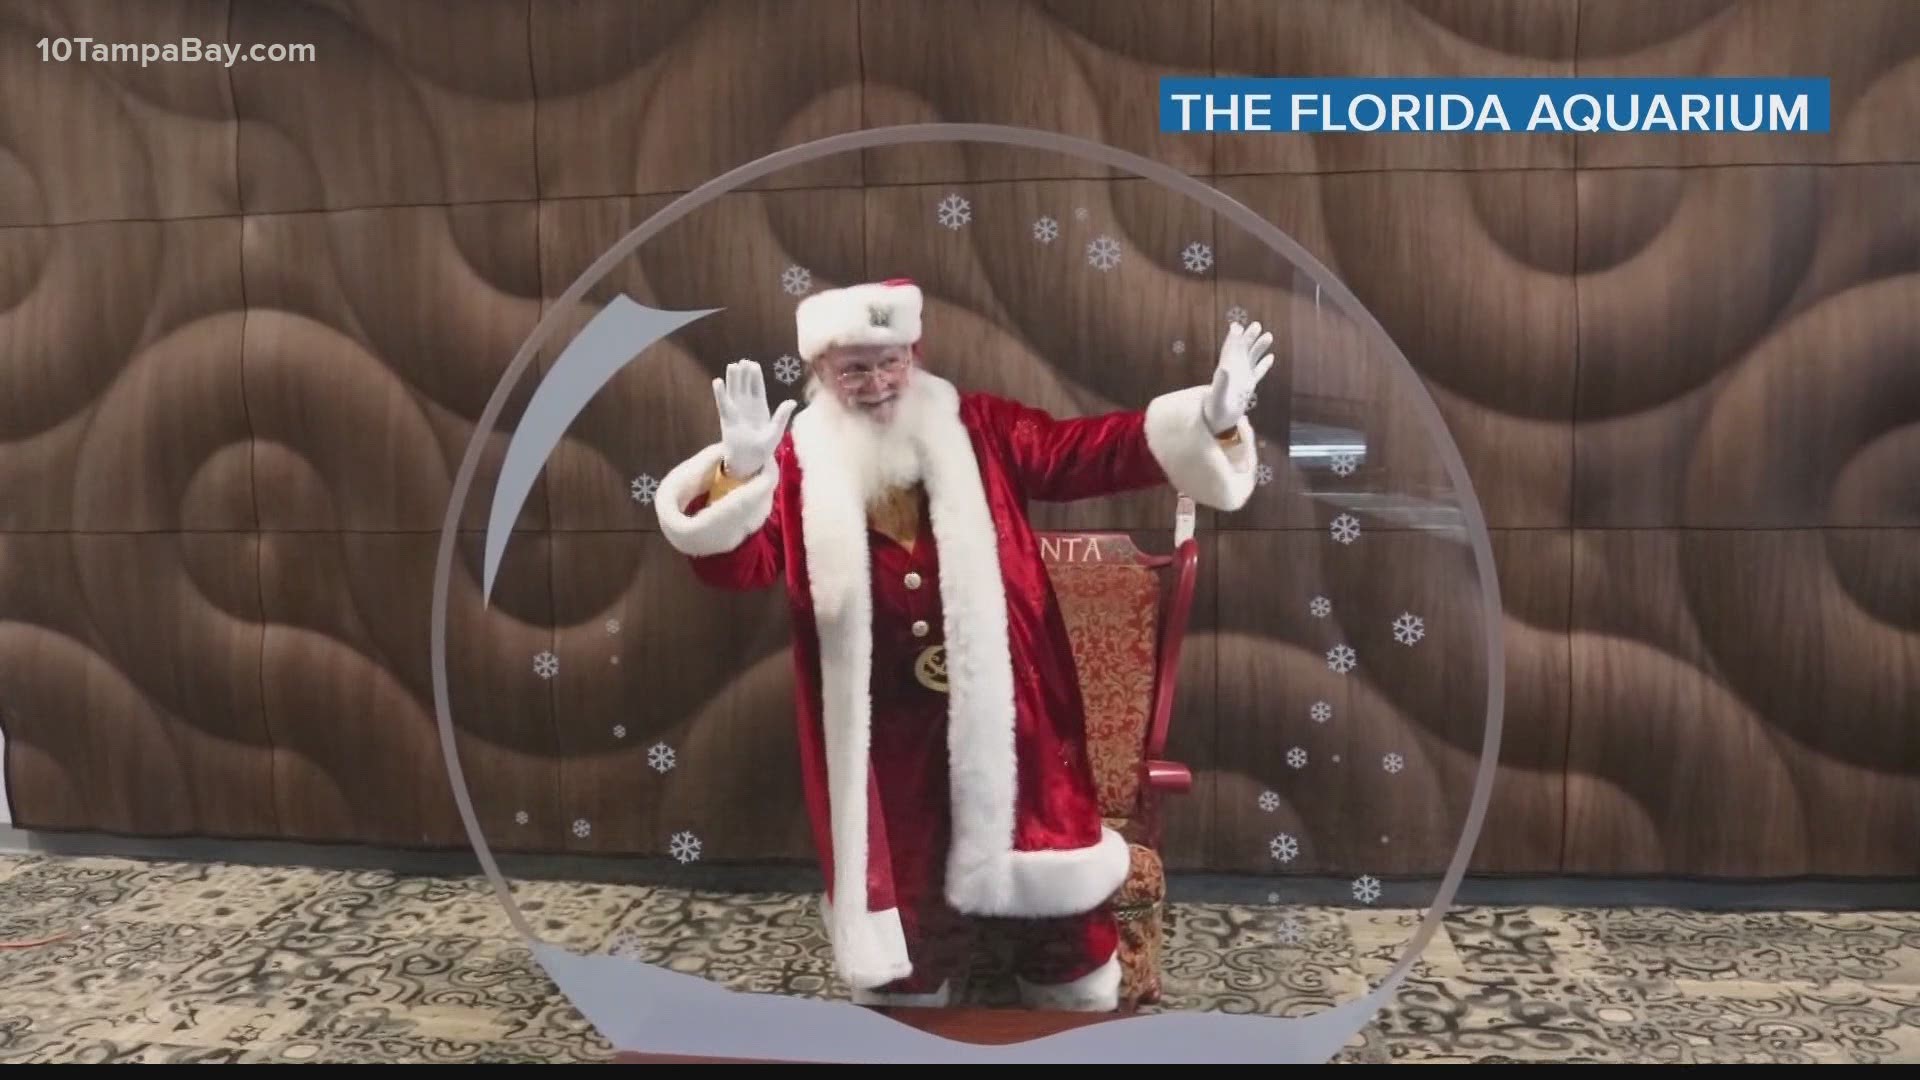 The Florida Aquarium, Busch Gardens, Zoo Tampa and others consider how to host Santa Claus during a pandemic to keep Christmas traditions feeling jolly.